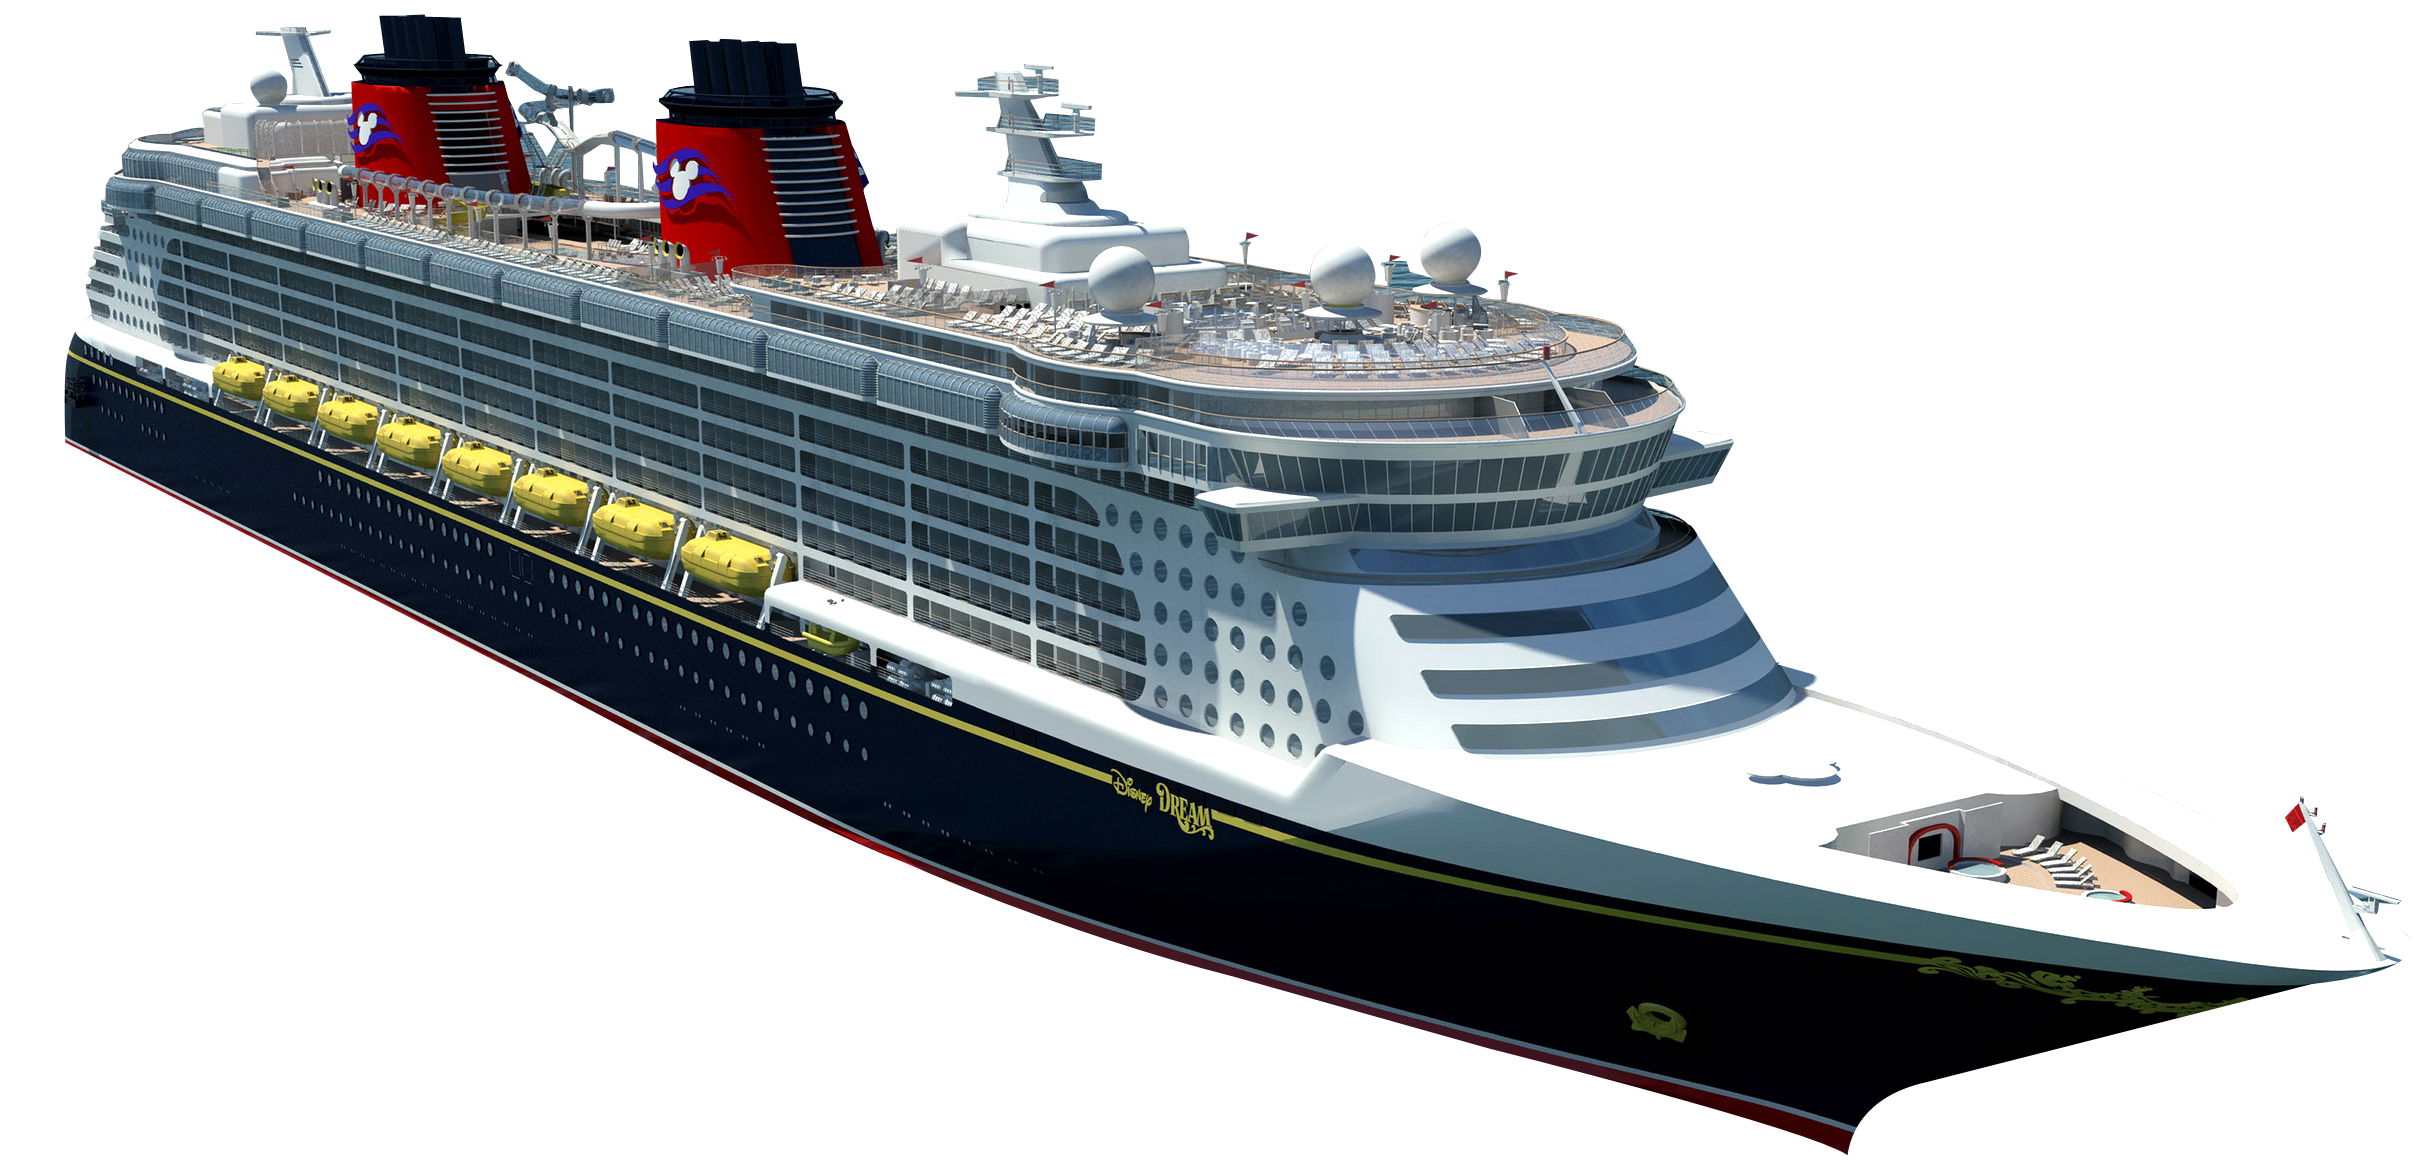 free clipart images cruise ships - photo #35